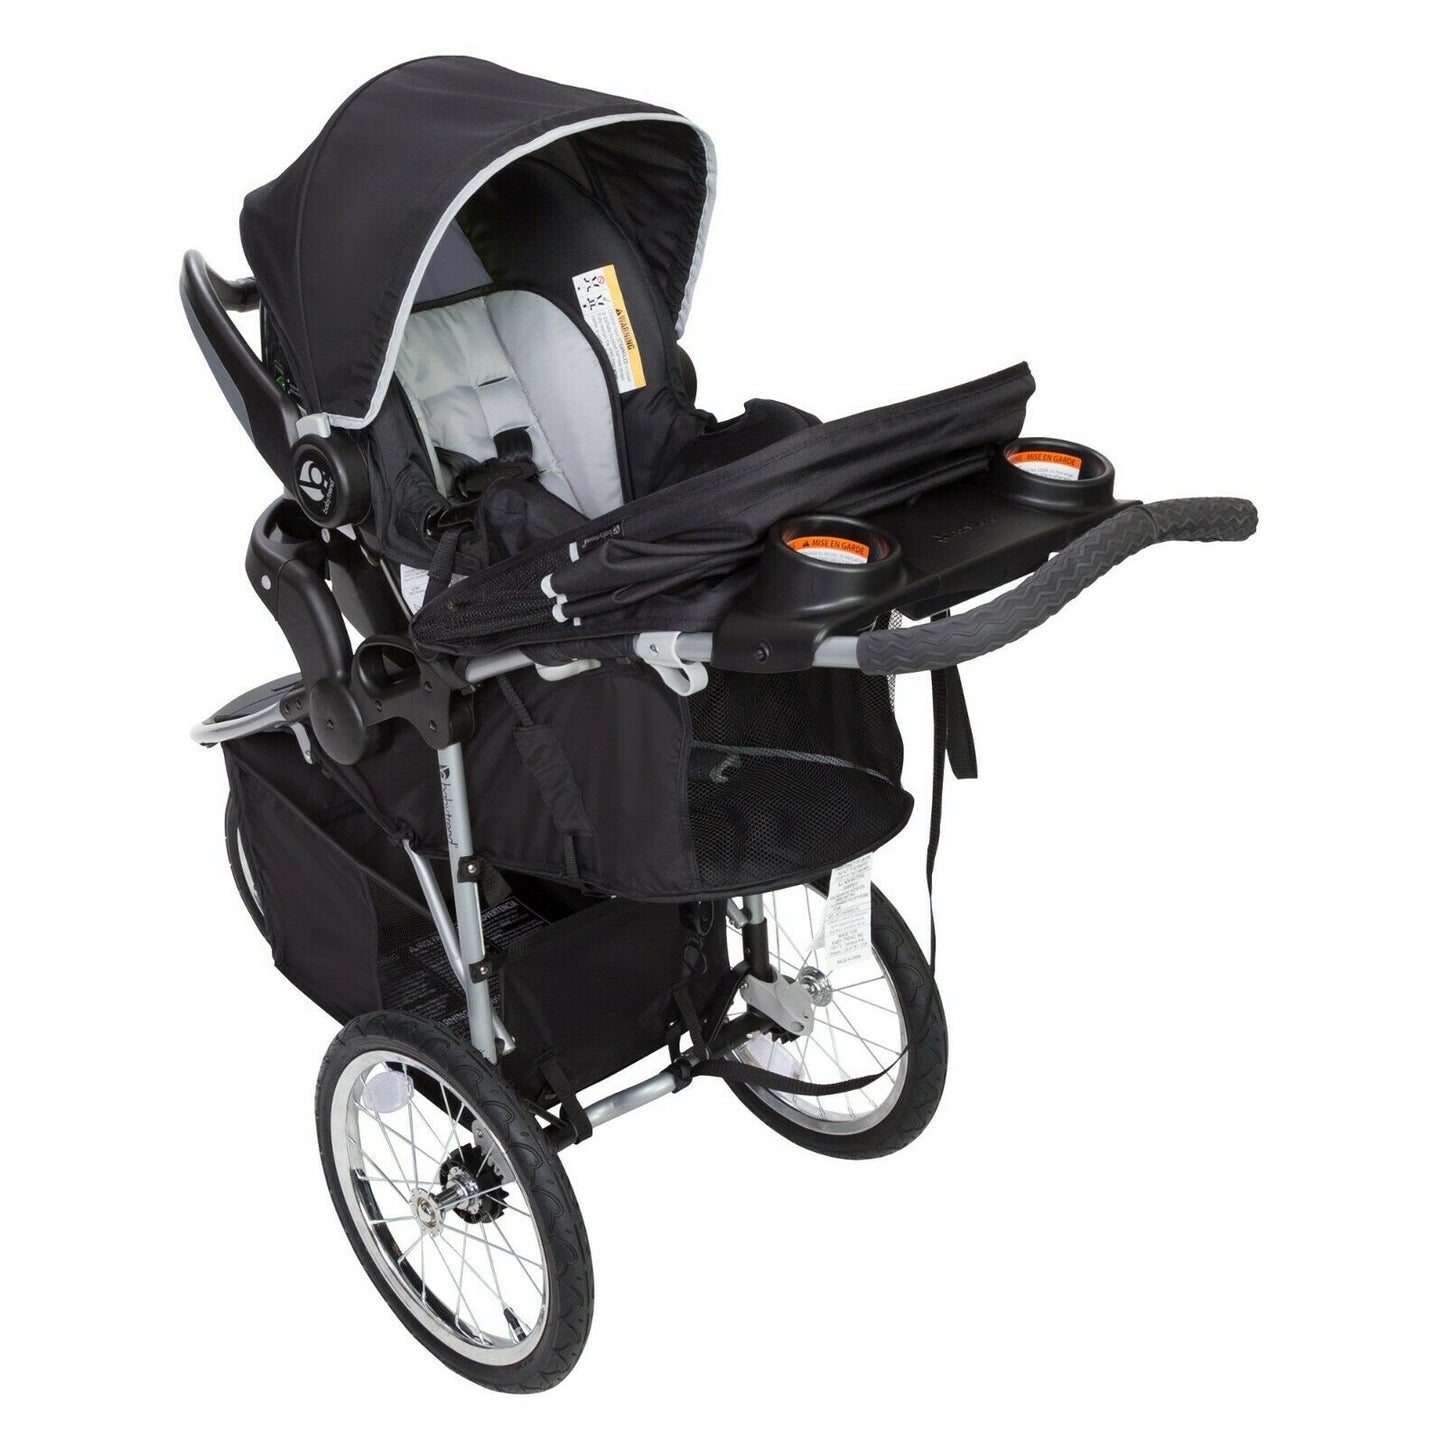 New Baby Stroller Travel System with Car Seat Playard Crib Jogging Combo